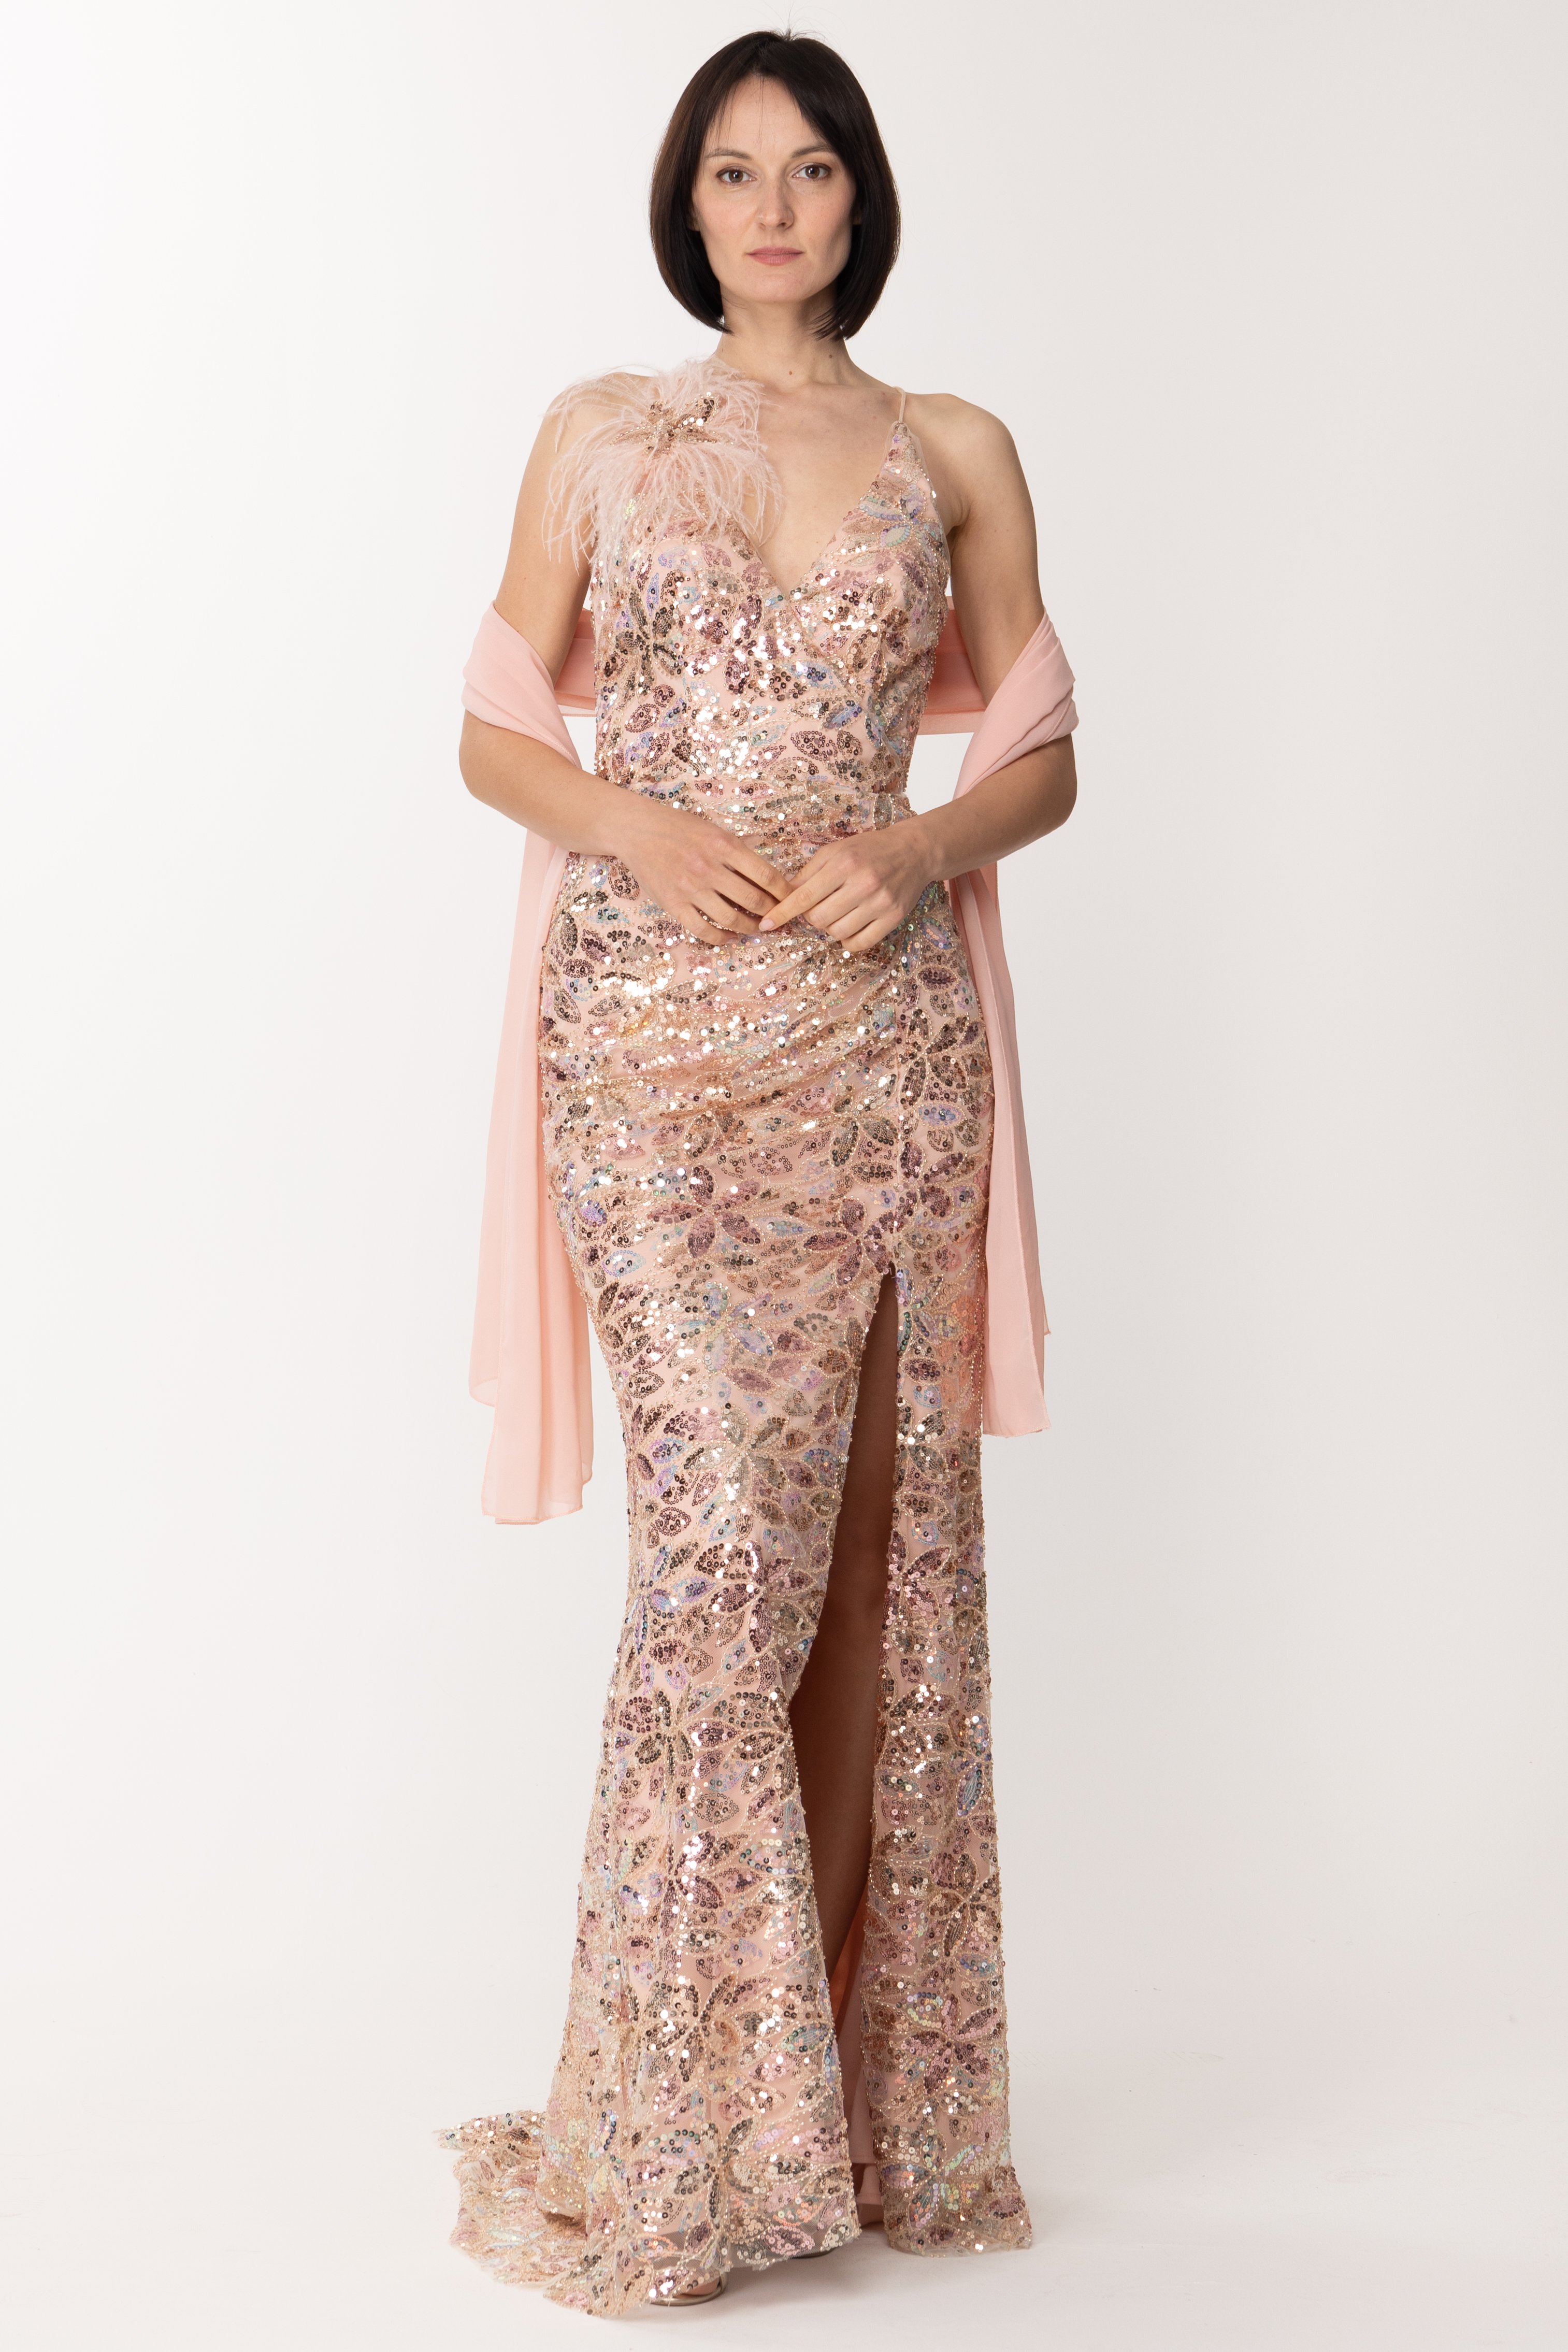 Preview: Fabiana Ferri Long dress with sequins and feather accessory Rosa